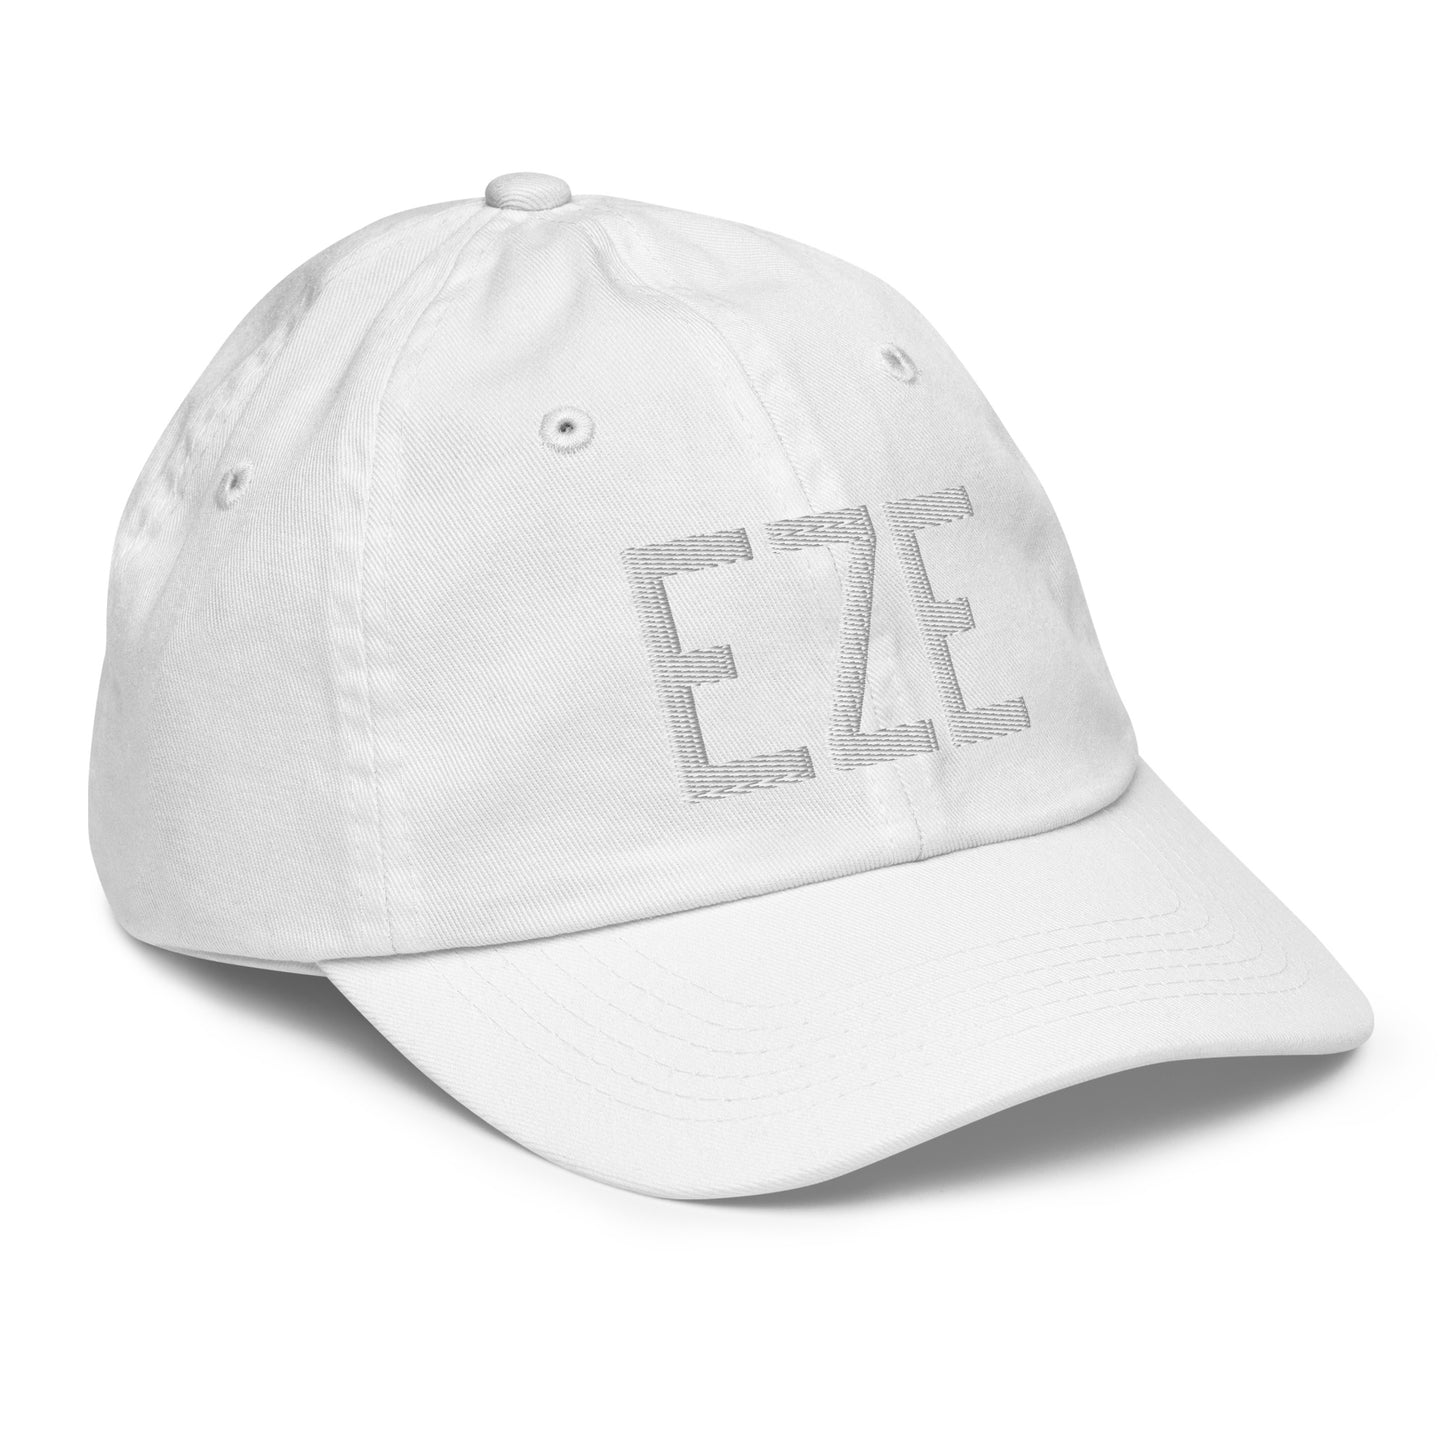 Airport Code Kid's Baseball Cap - White • EZE Buenos Aires • YHM Designs - Image 35